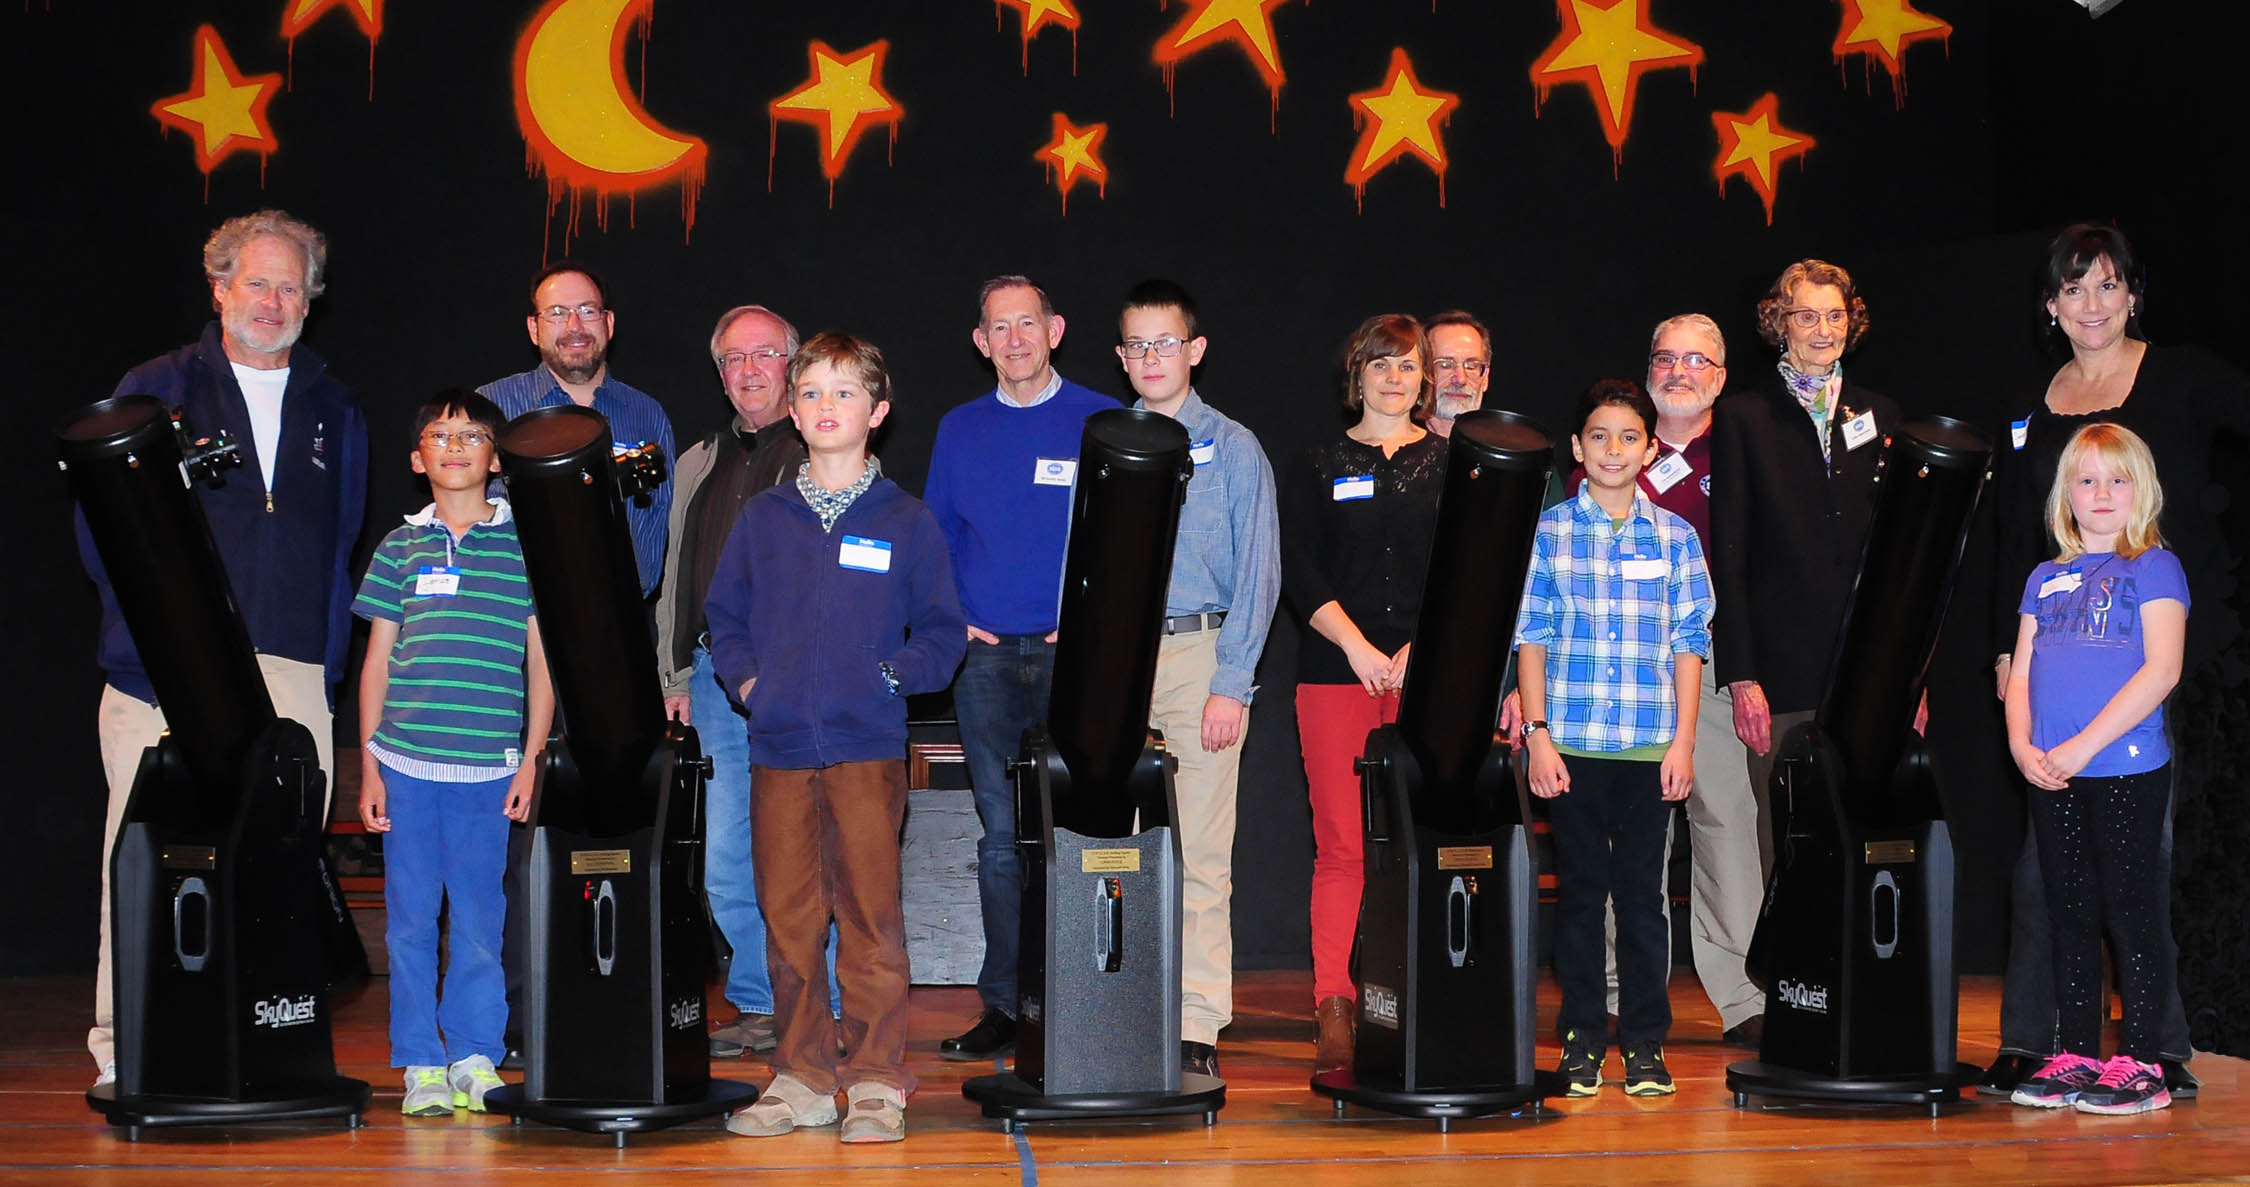 Winners of the 2015 SCAS Striking Sparks program pose with their Orion XT6 Classic Dobsonian telescope awards alongside proud sponsors, teachers and parents.